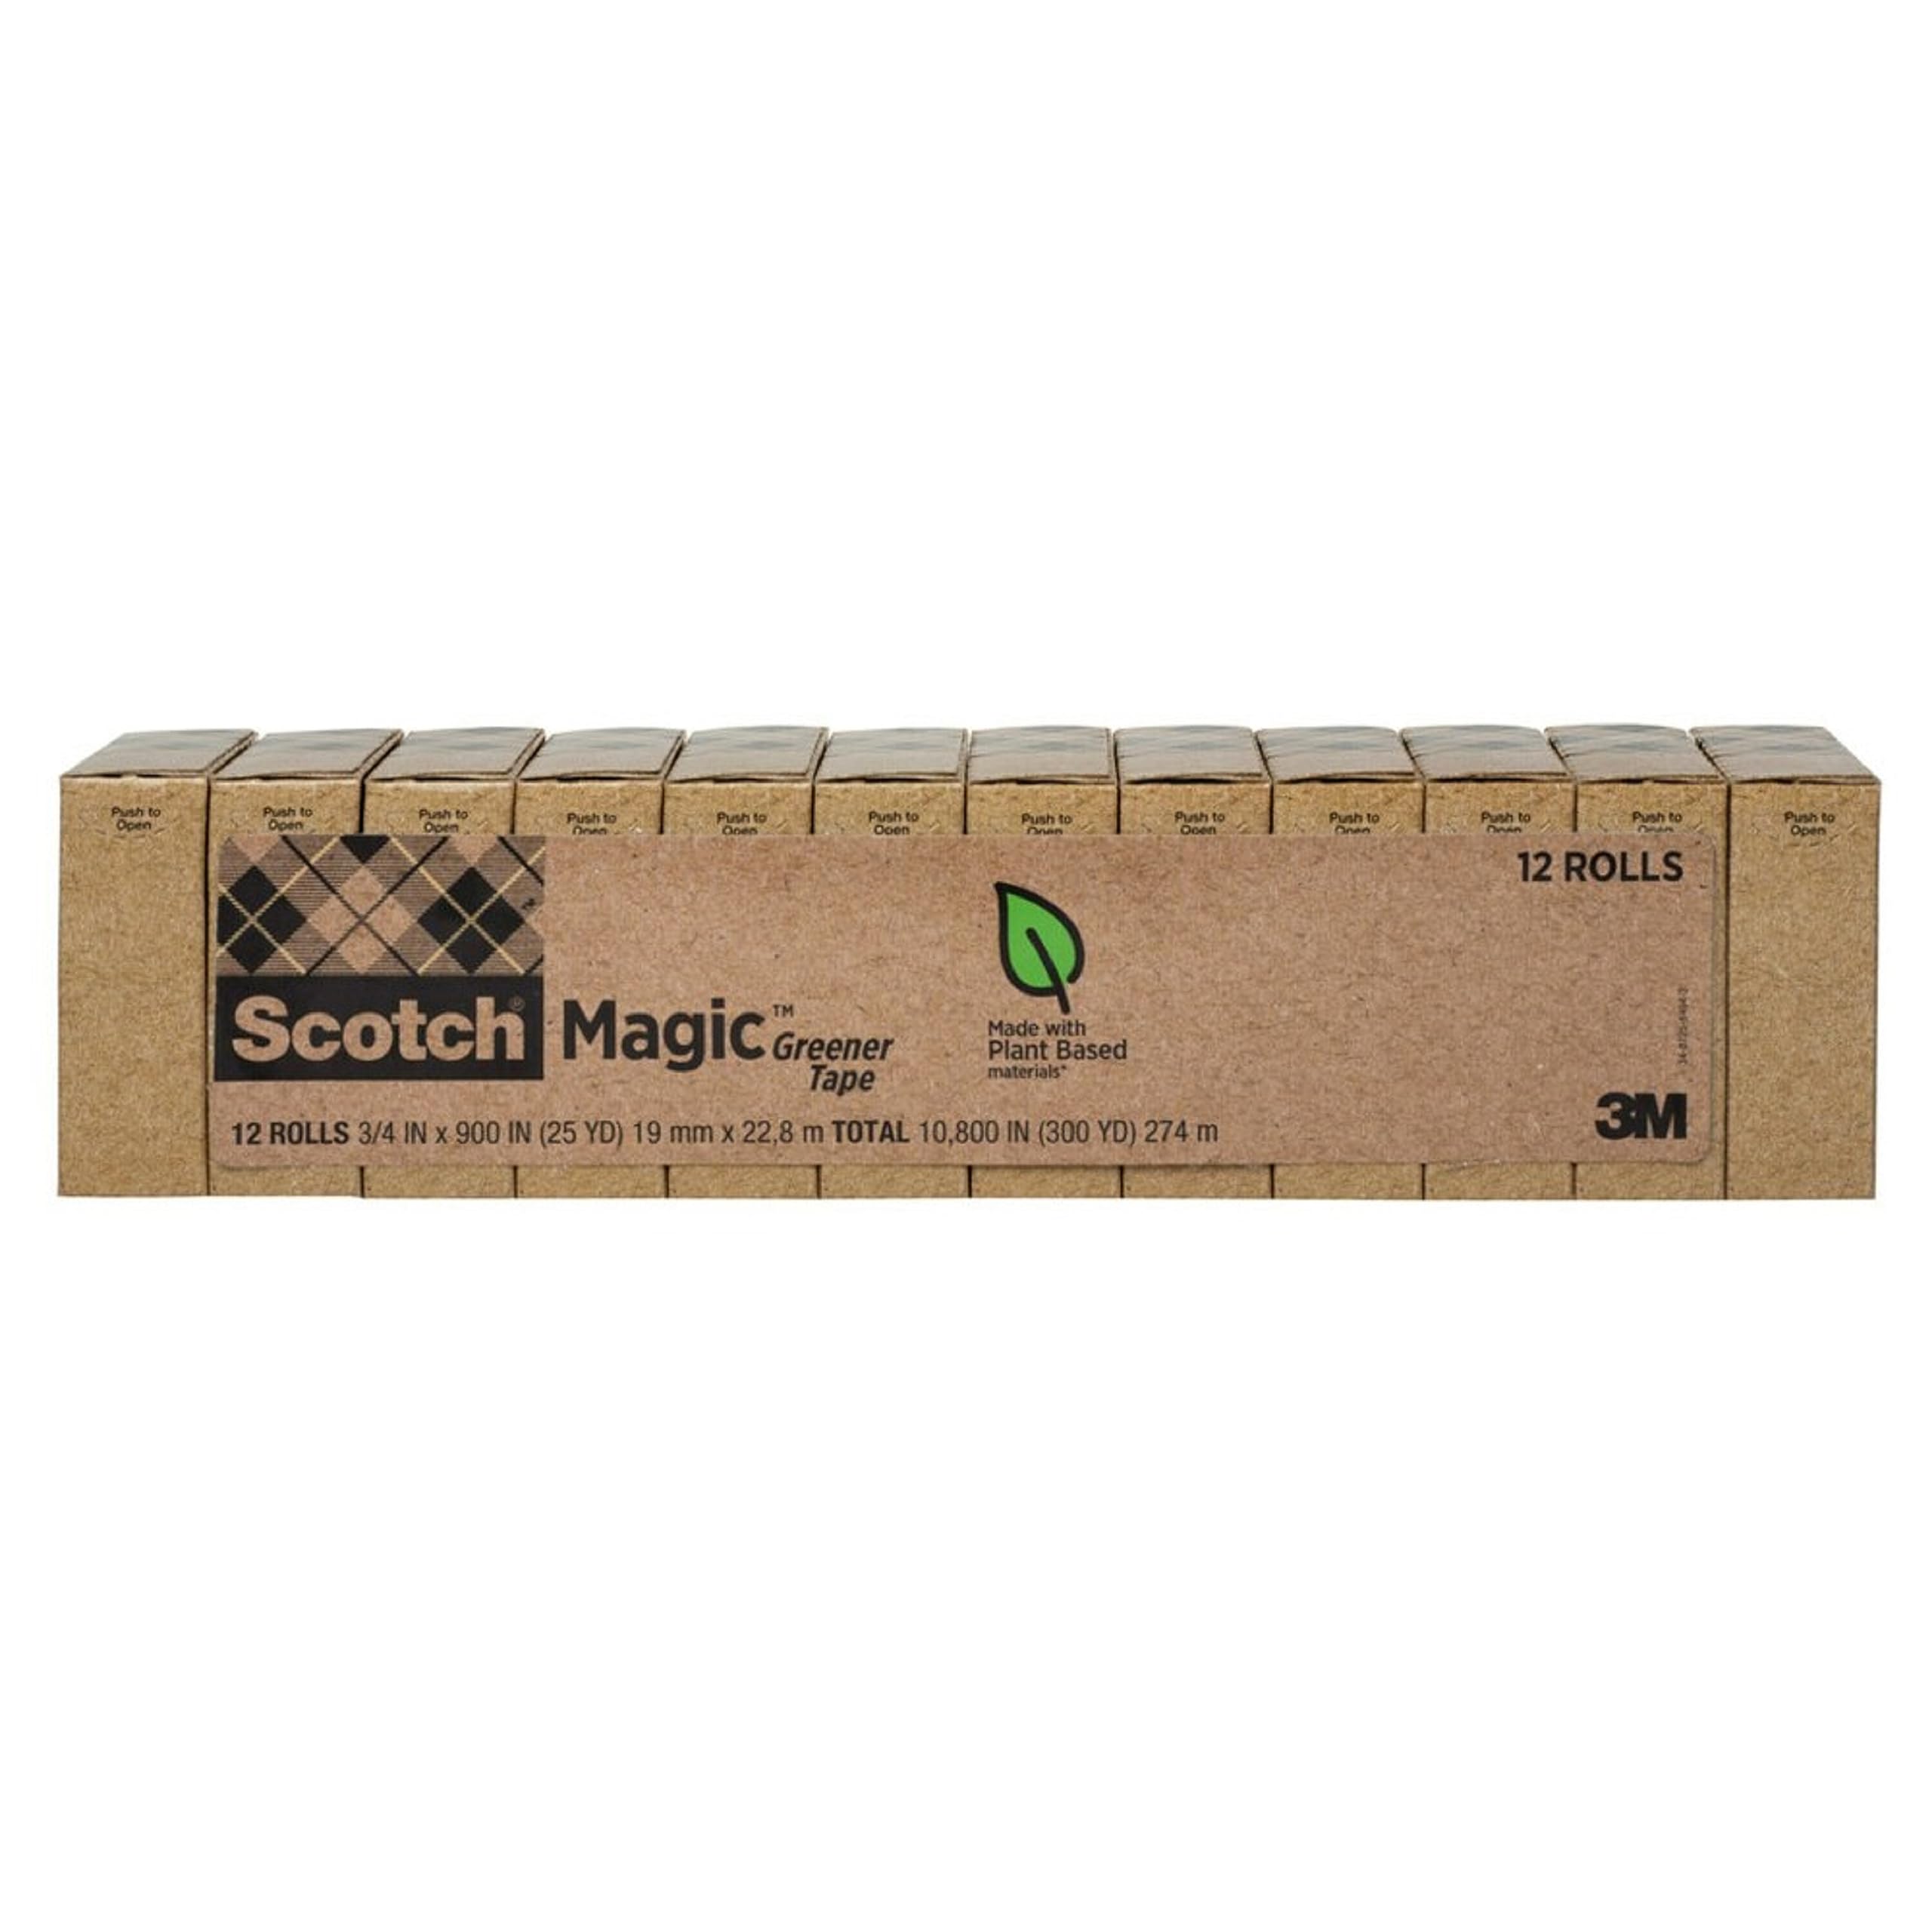 Scotch Magic Greener Tape, Invisible Tape for Fixing Paper, Office Supplies and Back to School Supplies, 0.75 in .x 900 in., 12 Rolls